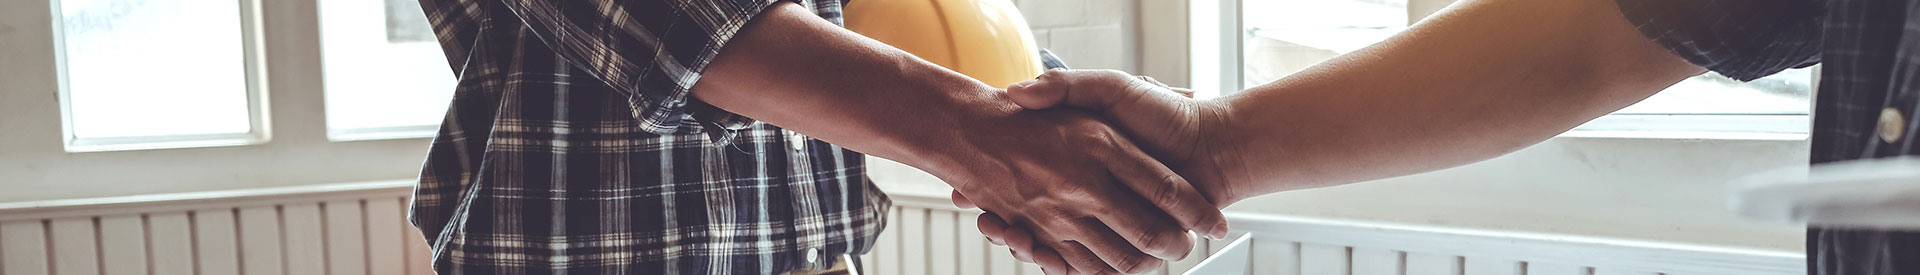 Two contractors shaking hands, one holding a hard hat